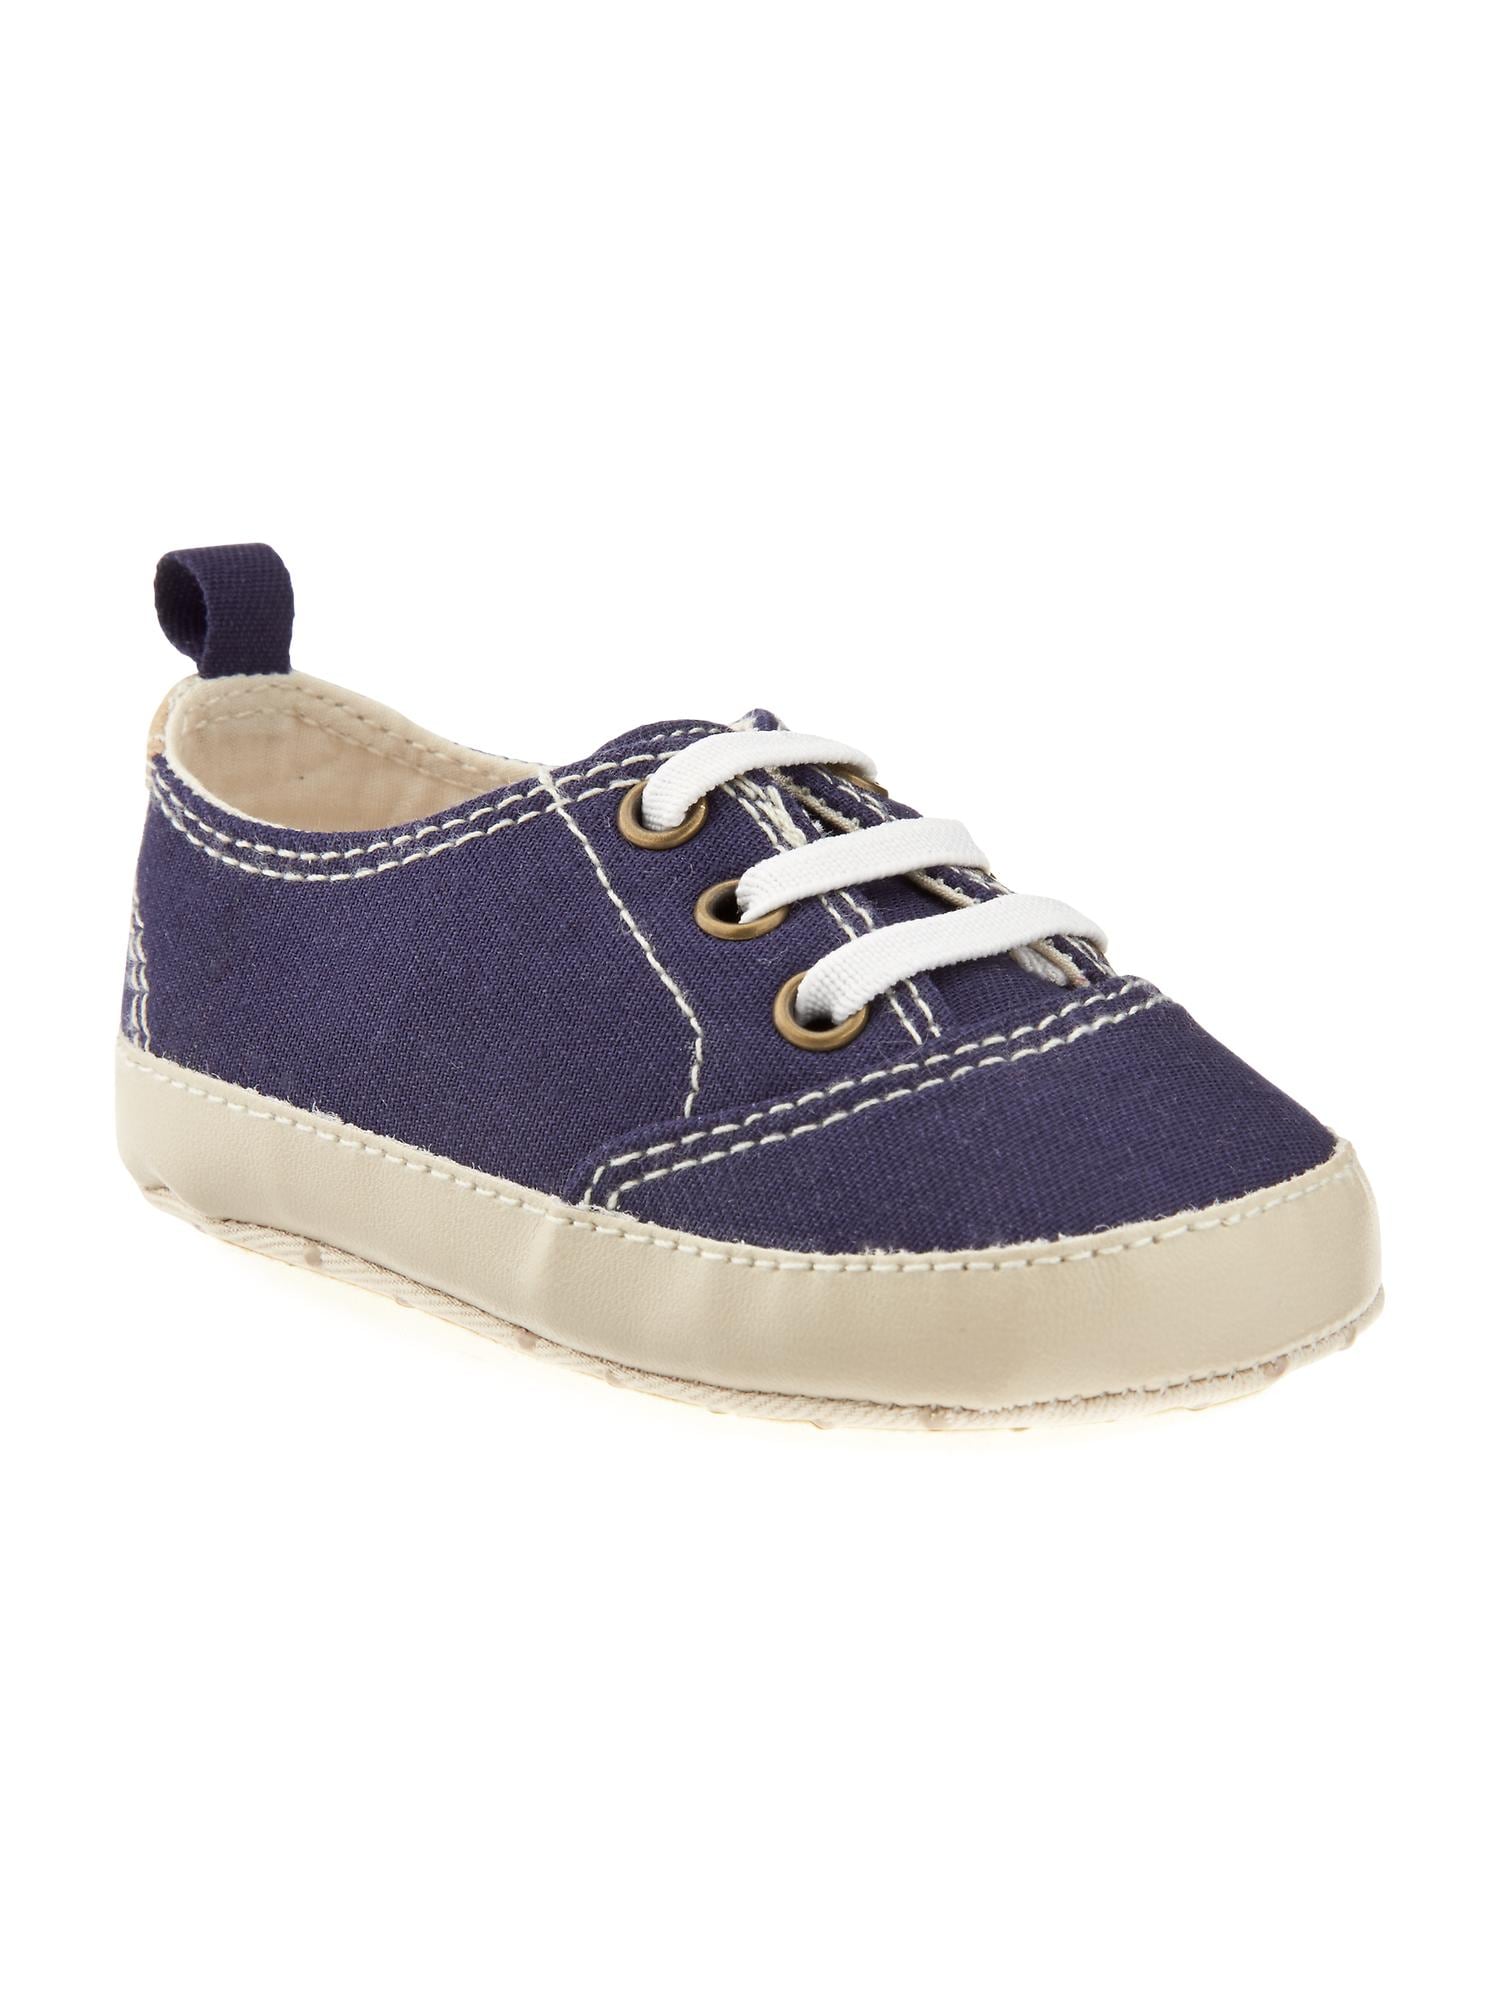 Canvas Pull-On Sneakers for Baby | Old Navy